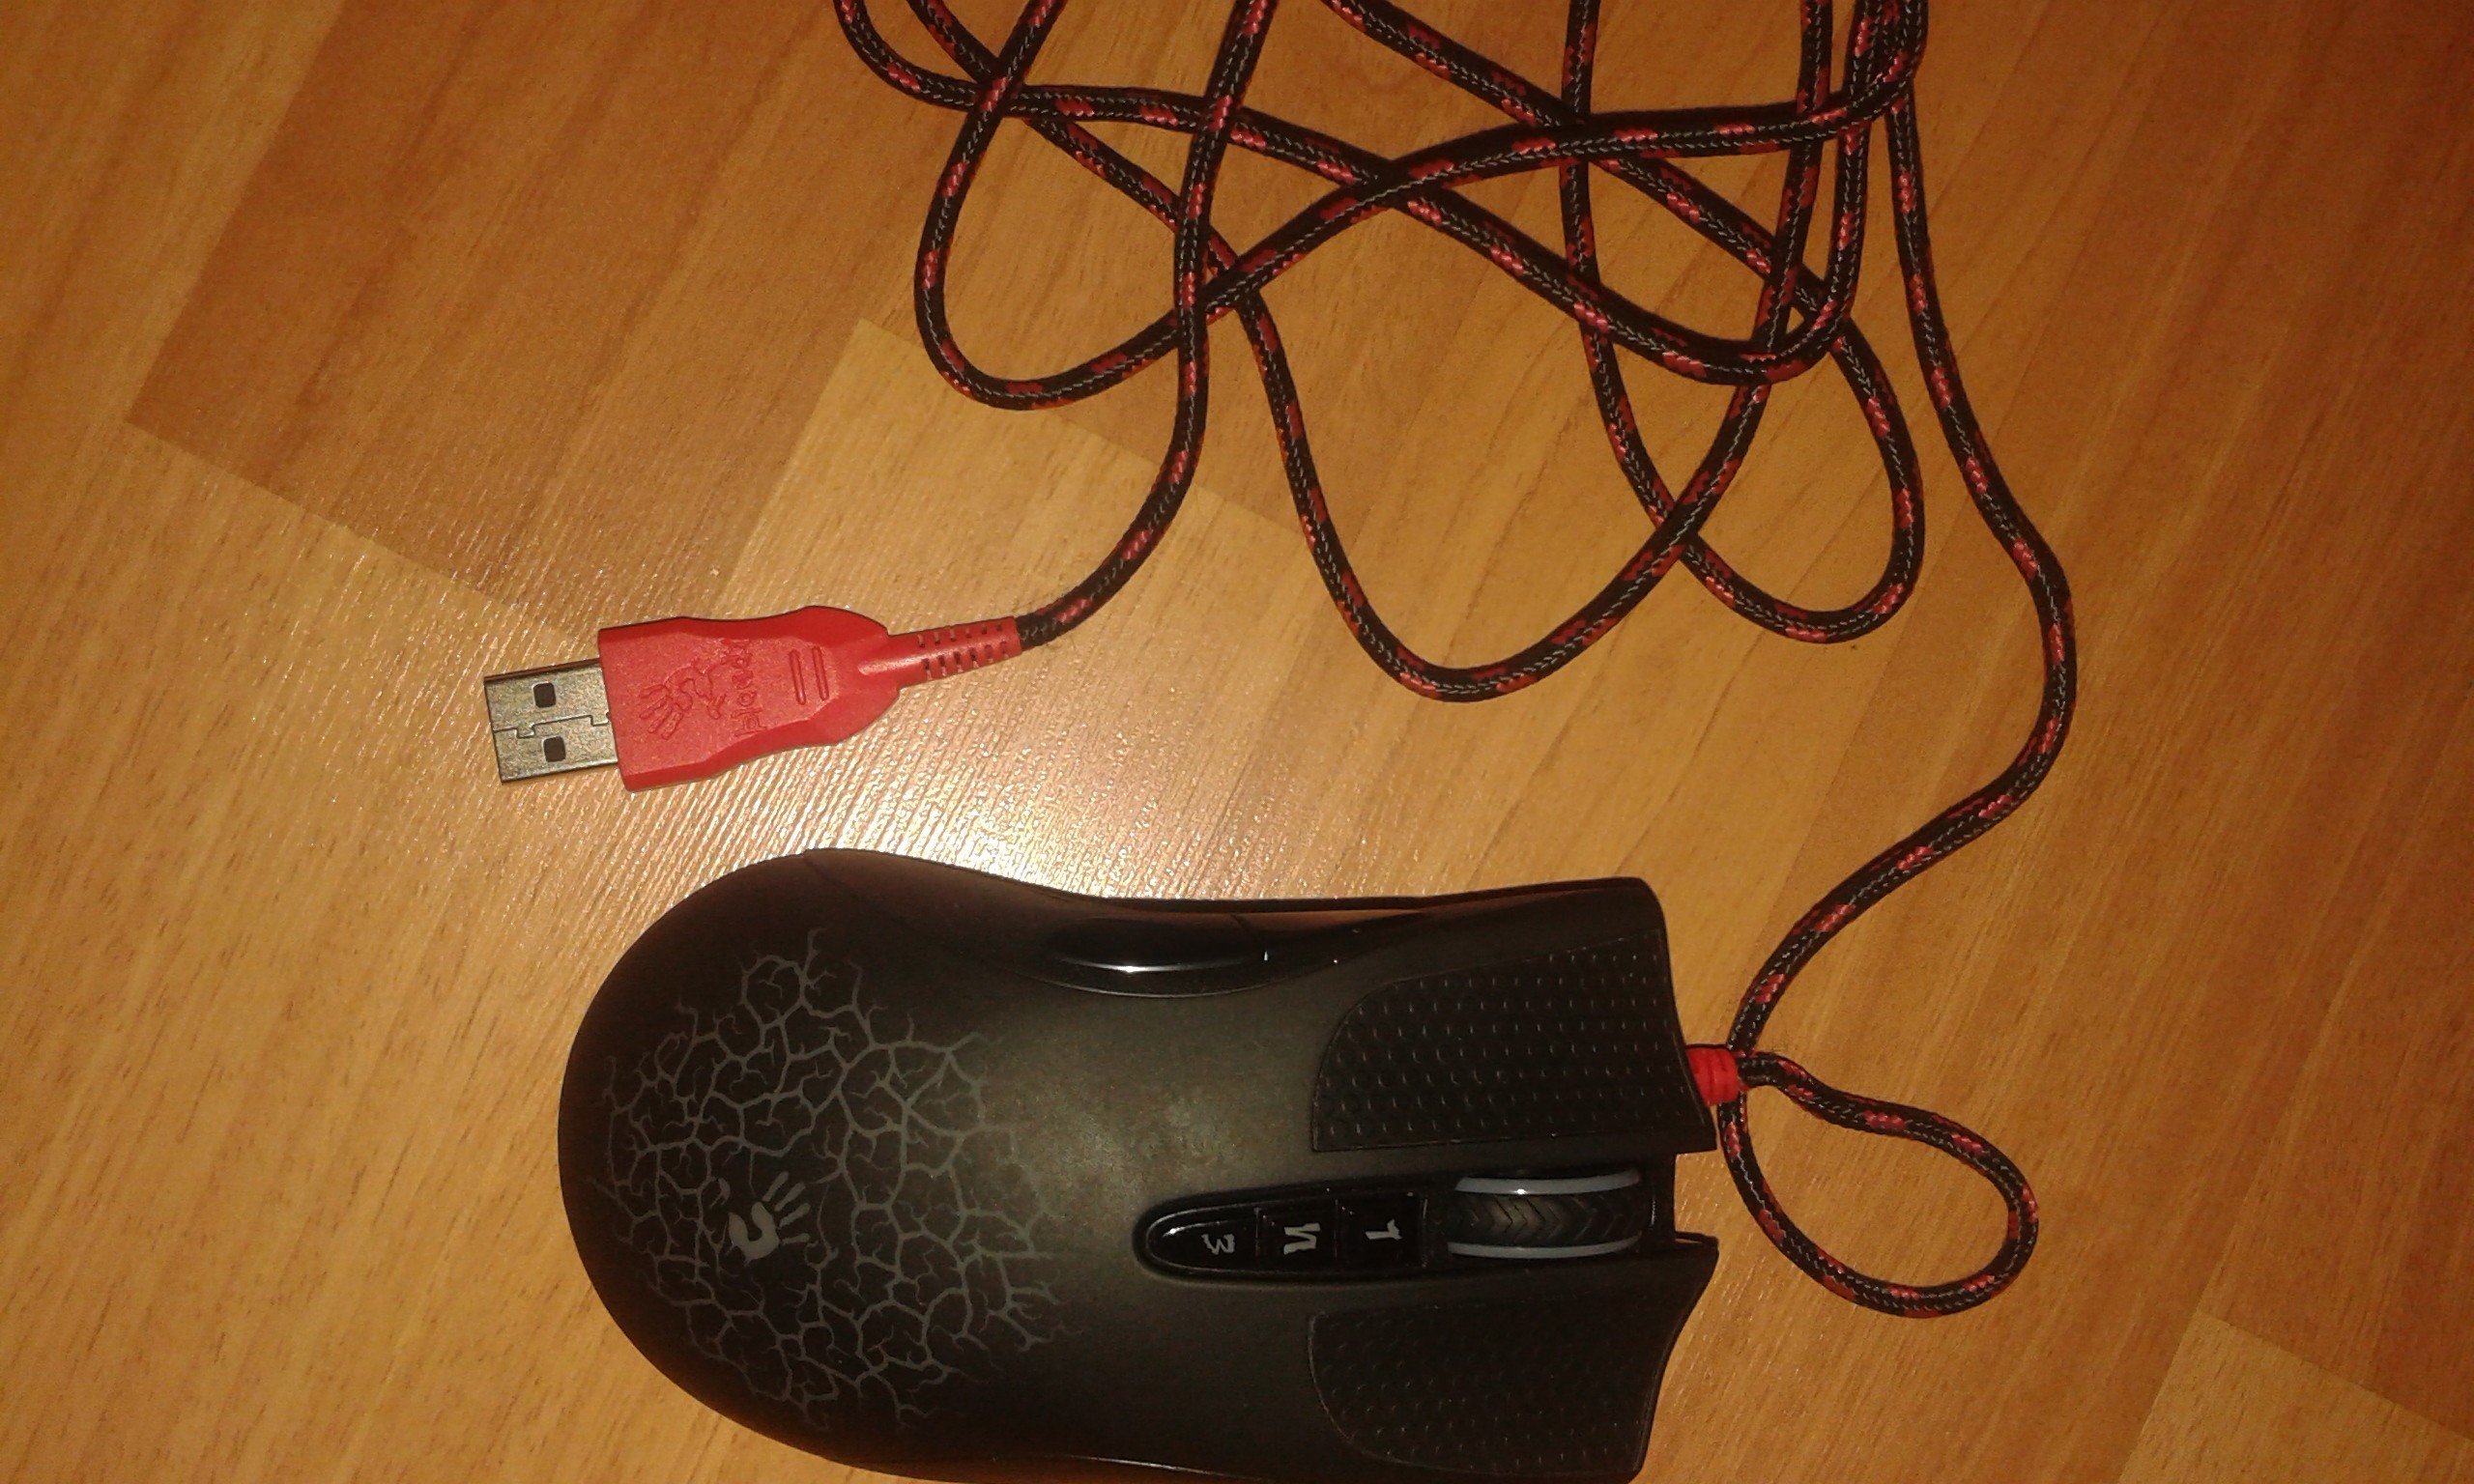 Bloody mouse a4tech rust обход фото 100